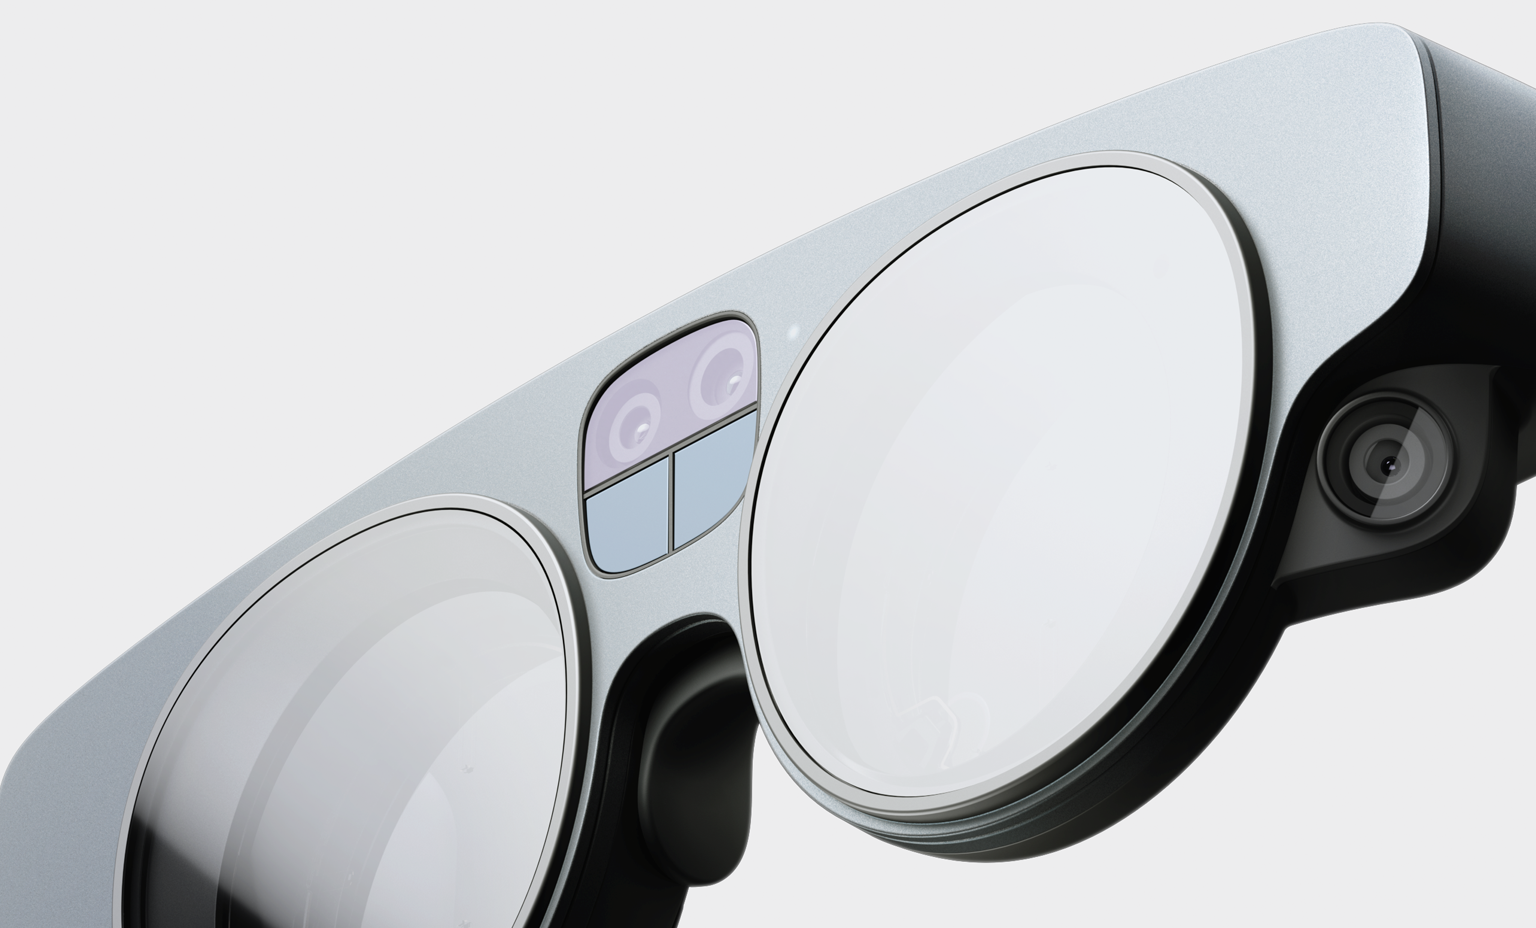 Magic Leap plans to enter the augmented reality eyewear market in 2022 with new augmented reality glasses.